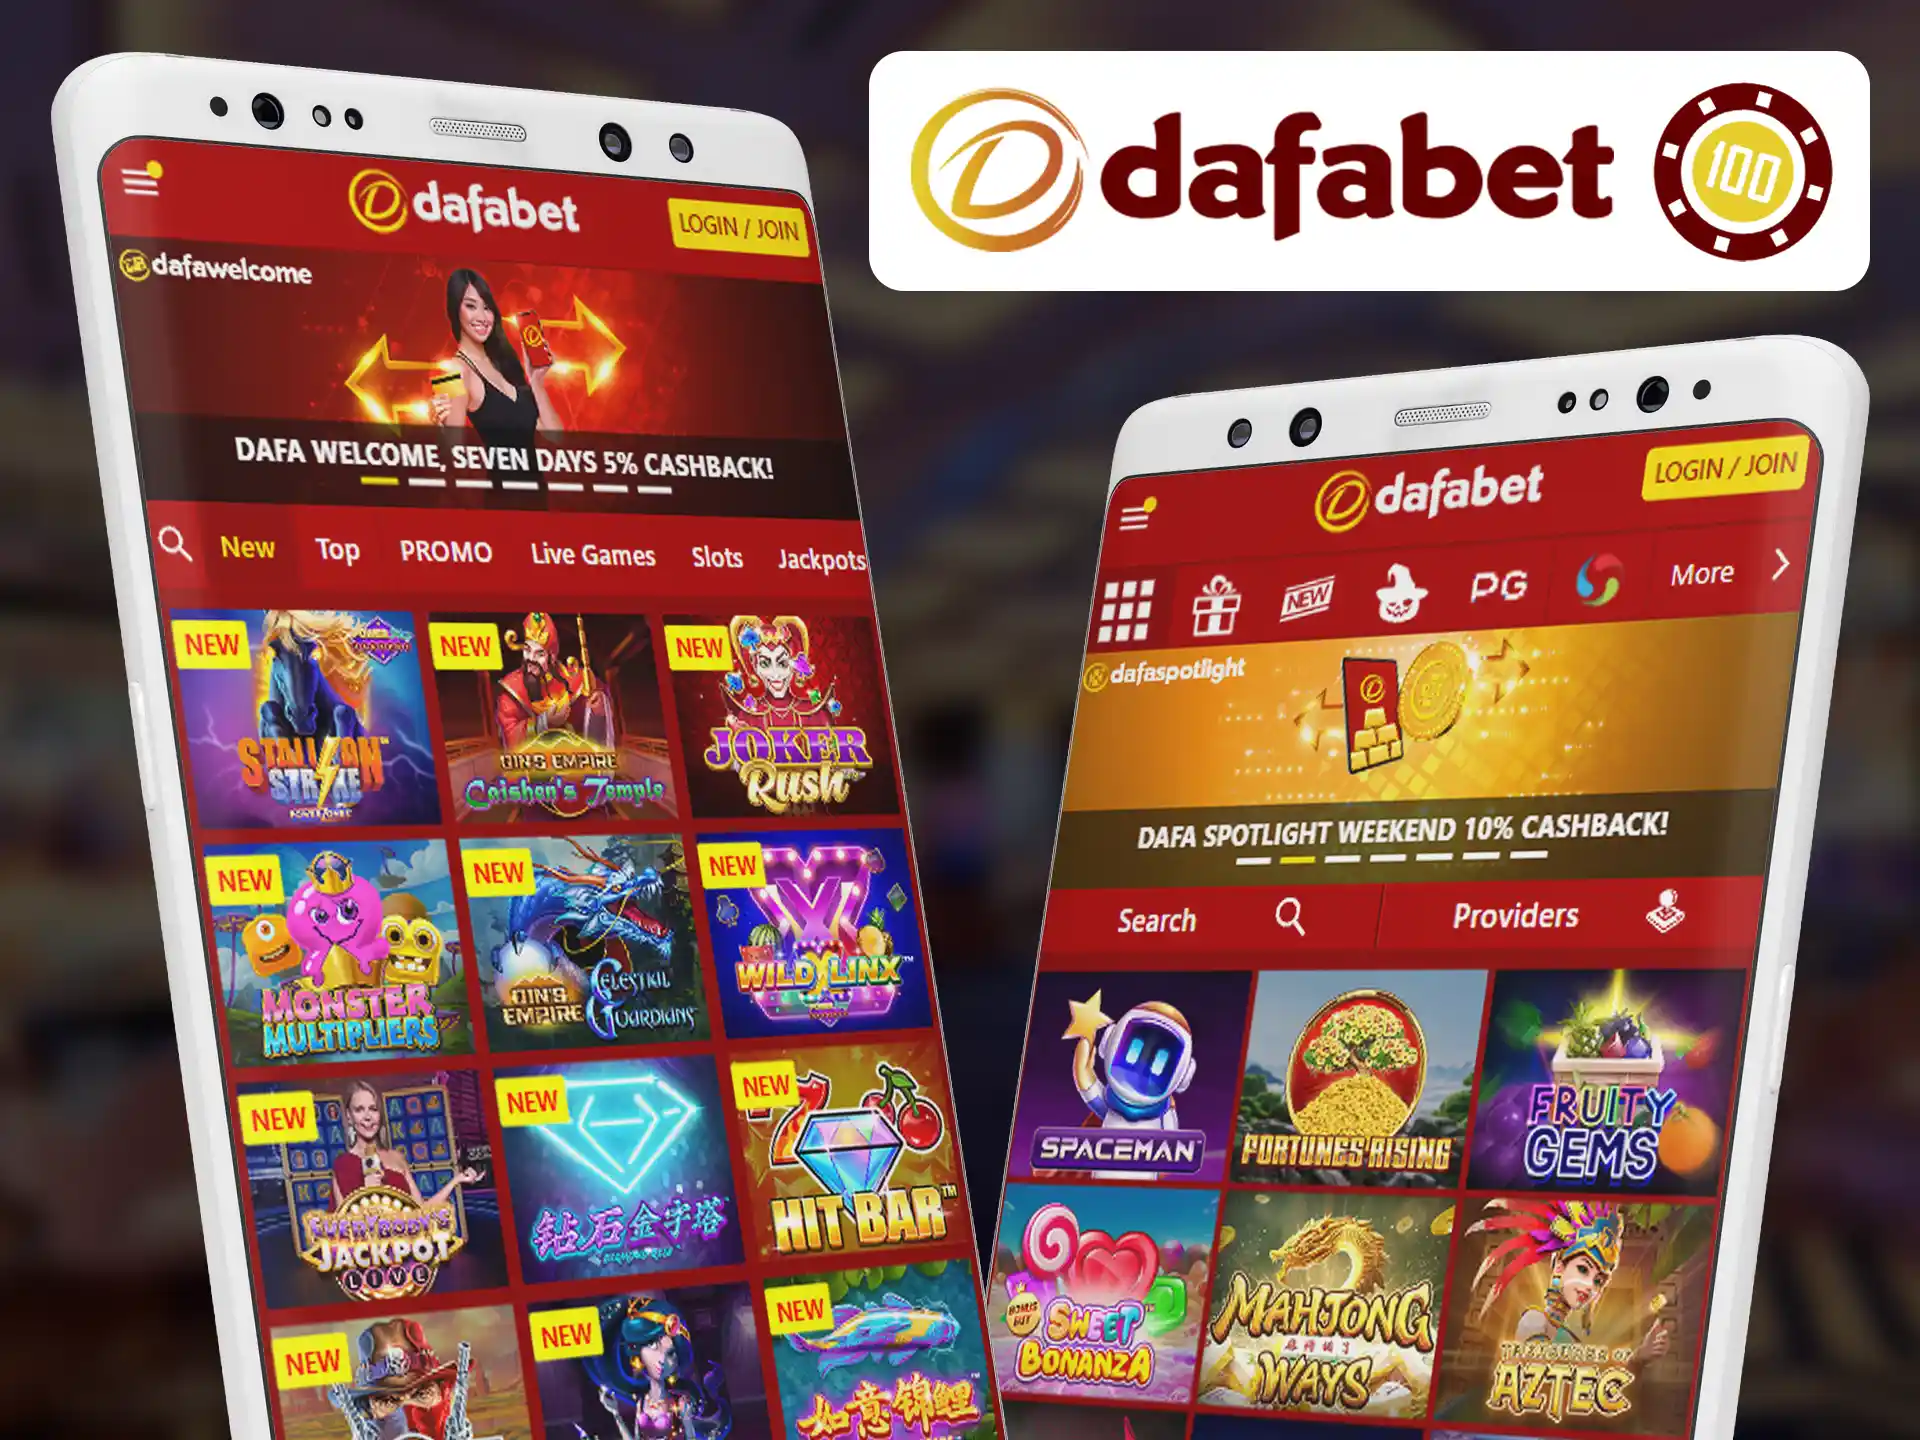 Using Dafabet app you can improve your casino playing experience.